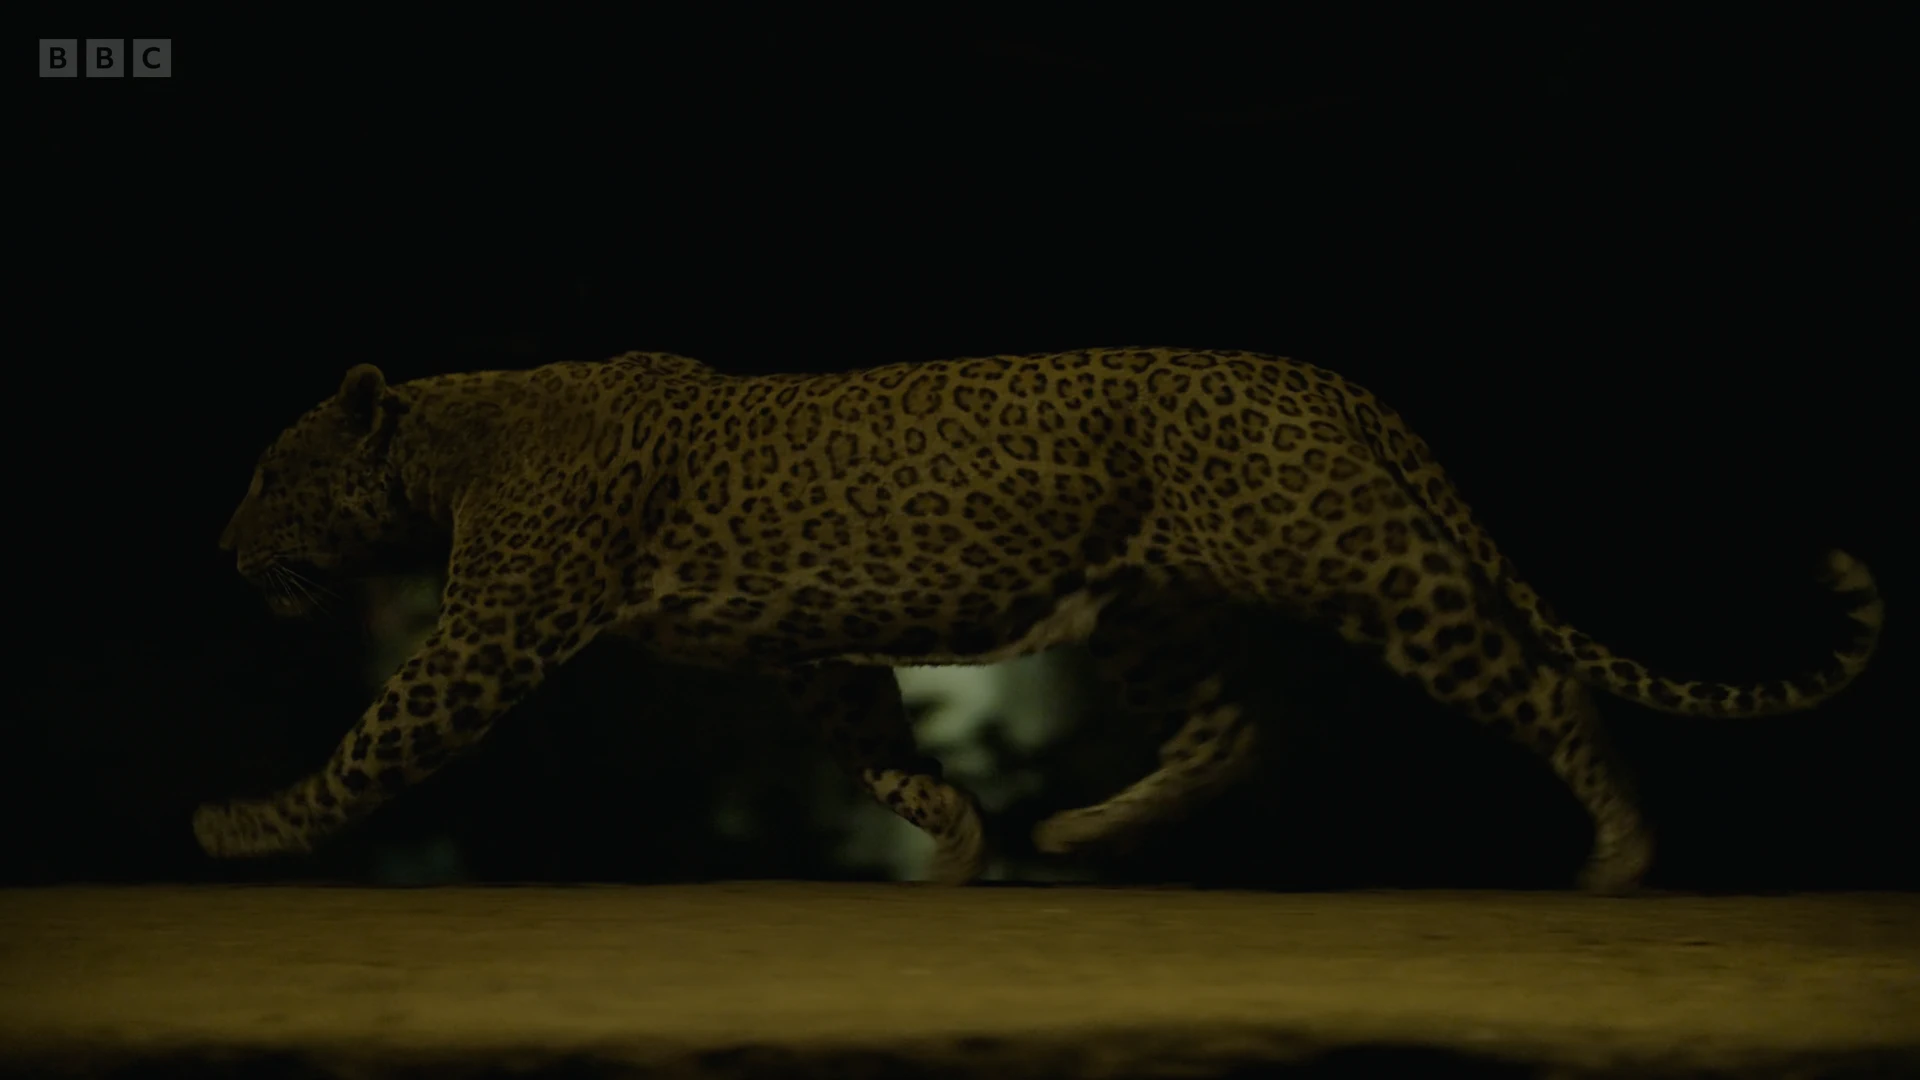 Indian leopard (Panthera pardus fuscus) as shown in Planet Earth II - Cities